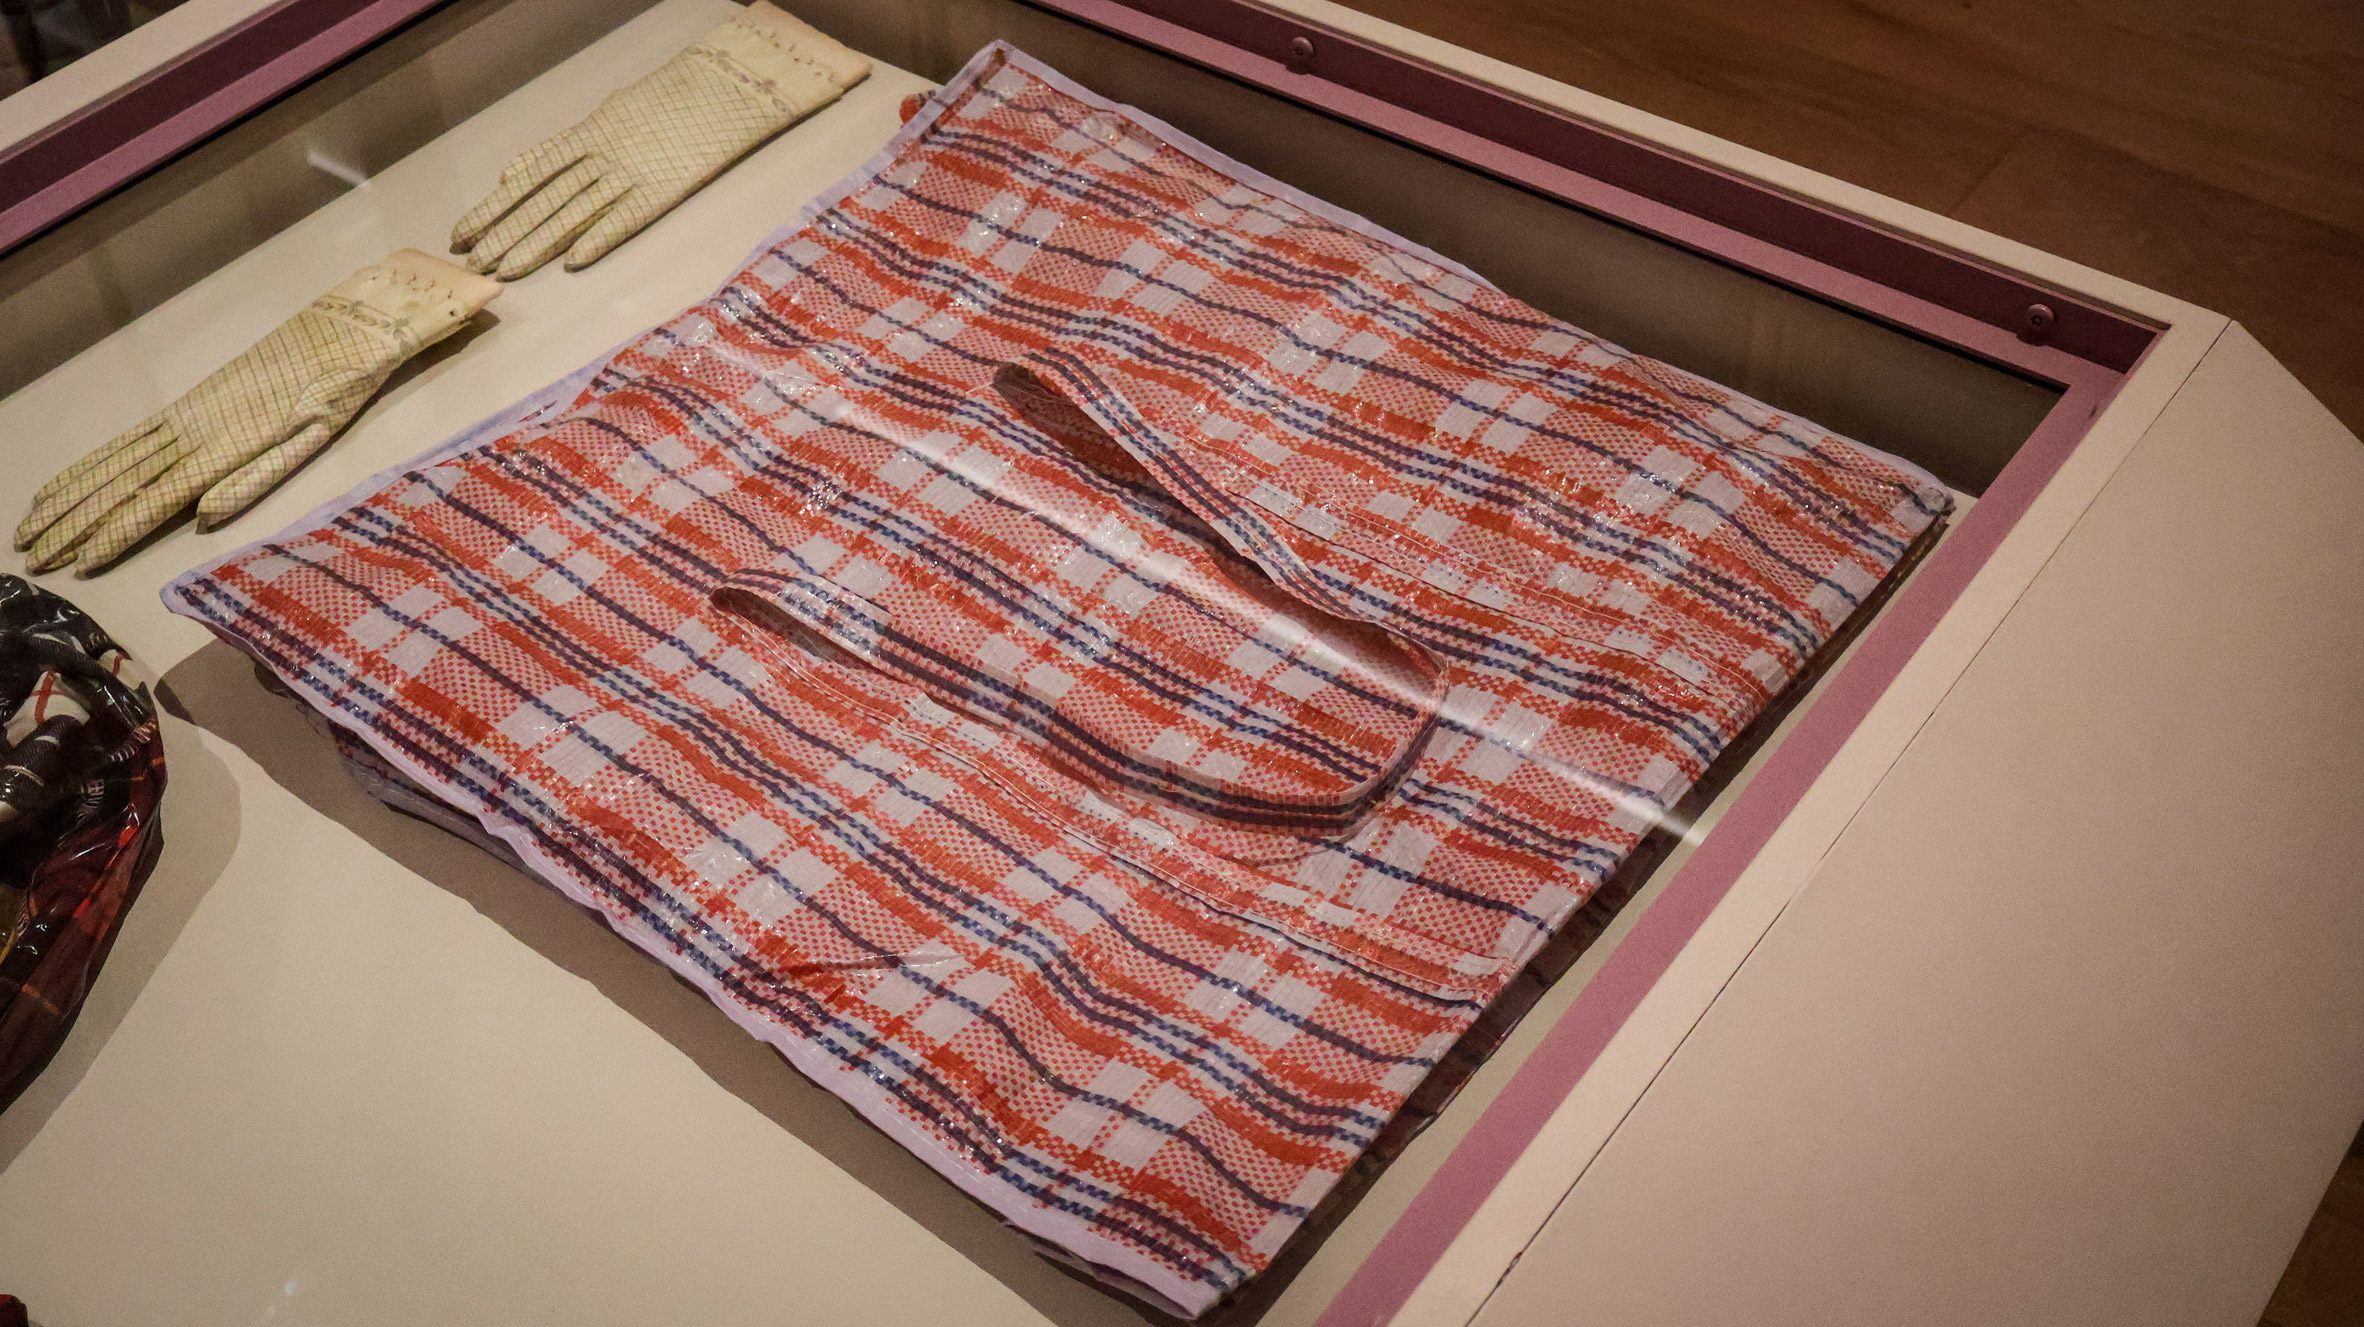 V&A Dundee exhibition busts some important myths about Tartan